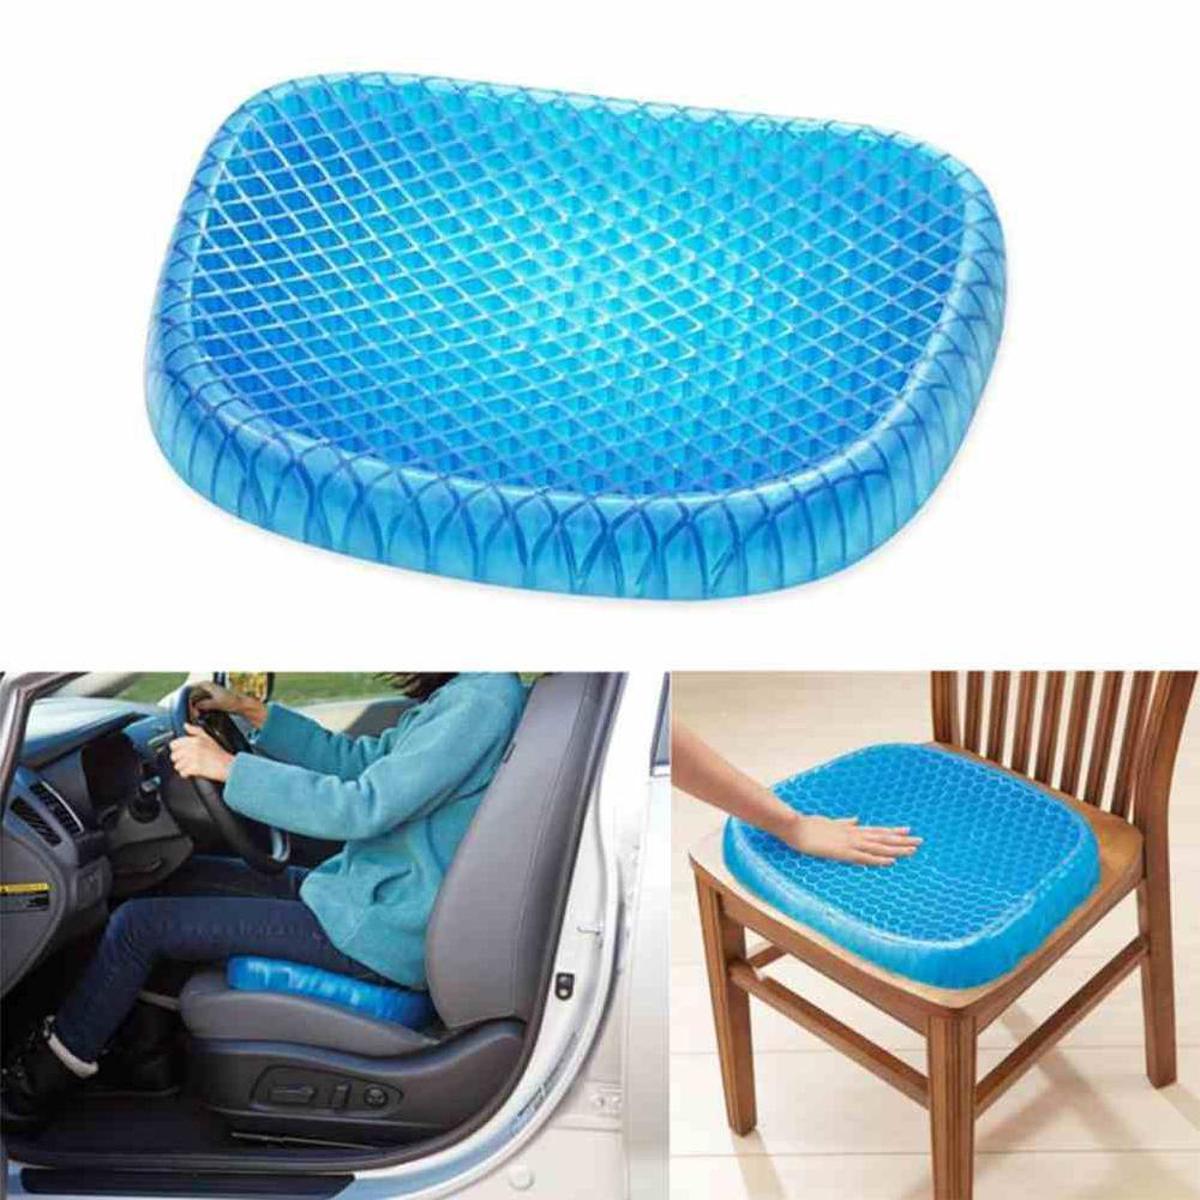 Gel Seat Cushion Home Office Desk Chair Egg Sitter Cooling Pad Back Pain  Relief